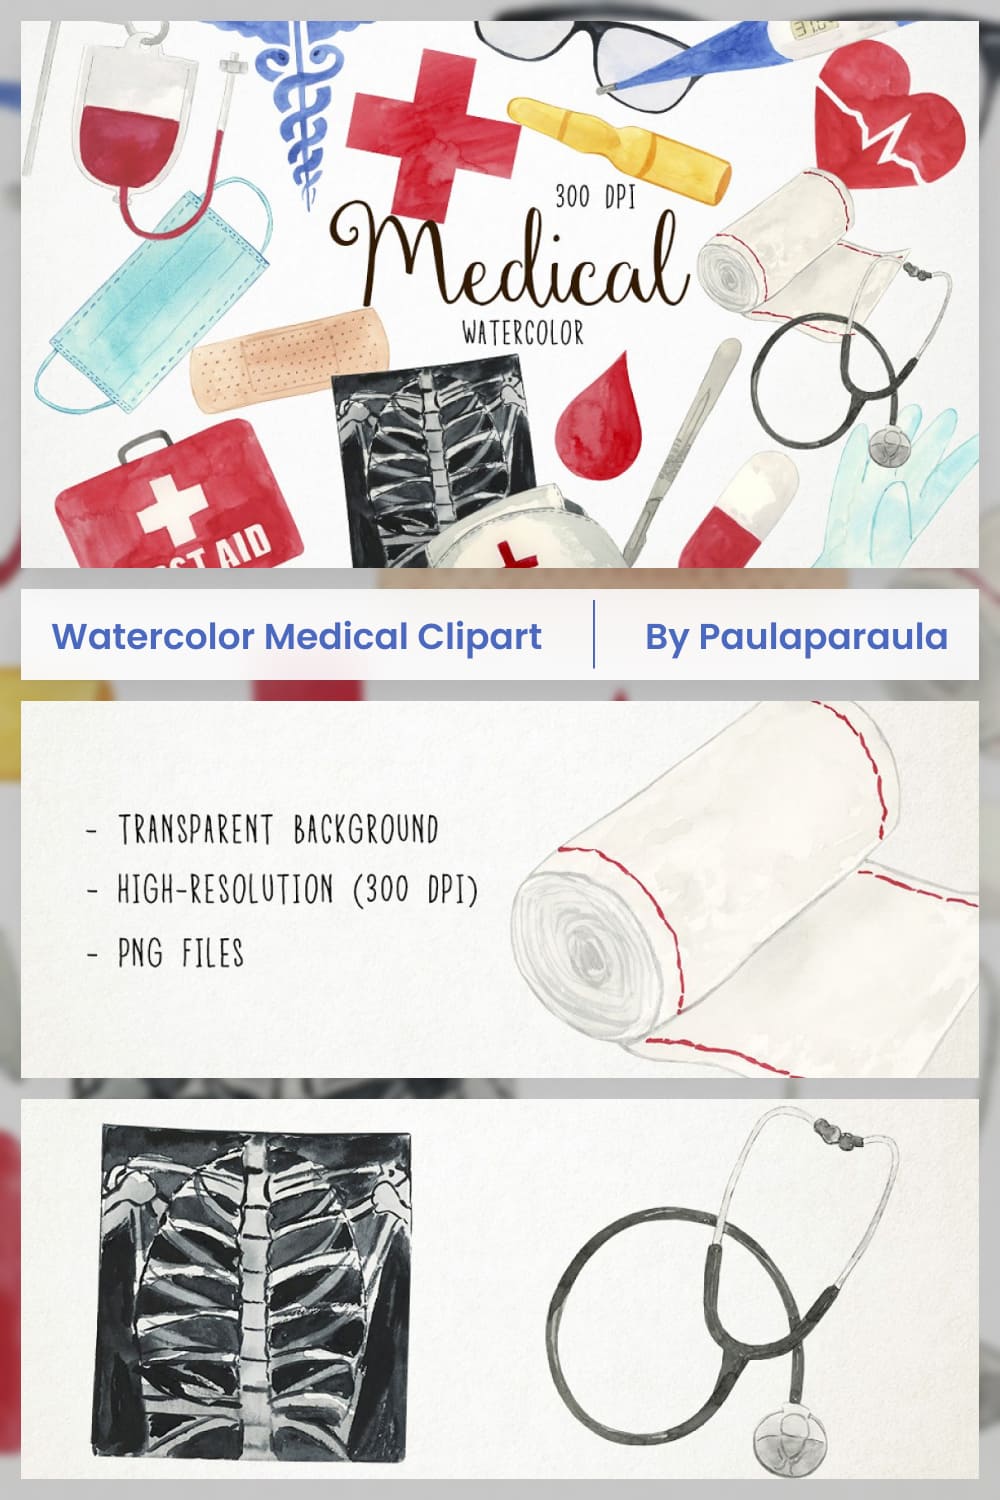 watercolor medical clipart pinterest image.